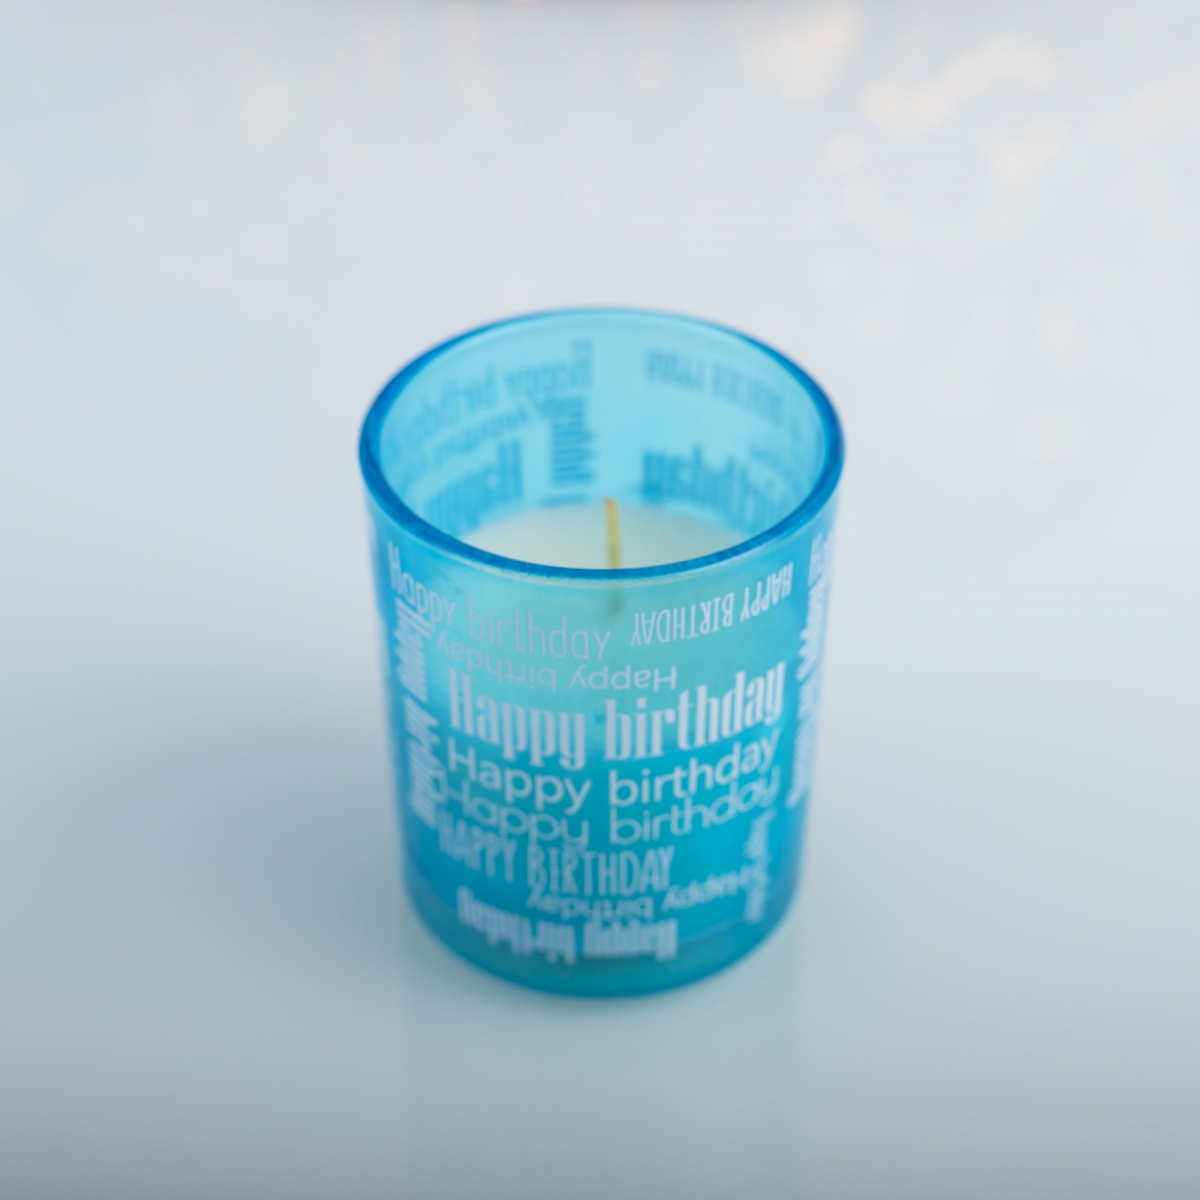 Scented Candles : Happy Birthday , Blue Candle Jar , China Factory , Wholesale Price-HOWCANDLE-Candles,Scented Candles,Aromatherapy Candles,Soy Candles,Vegan Candles,Jar Candles,Pillar Candles,Candle Gift Sets,Essential Oils,Reed Diffuser,Candle Holder,